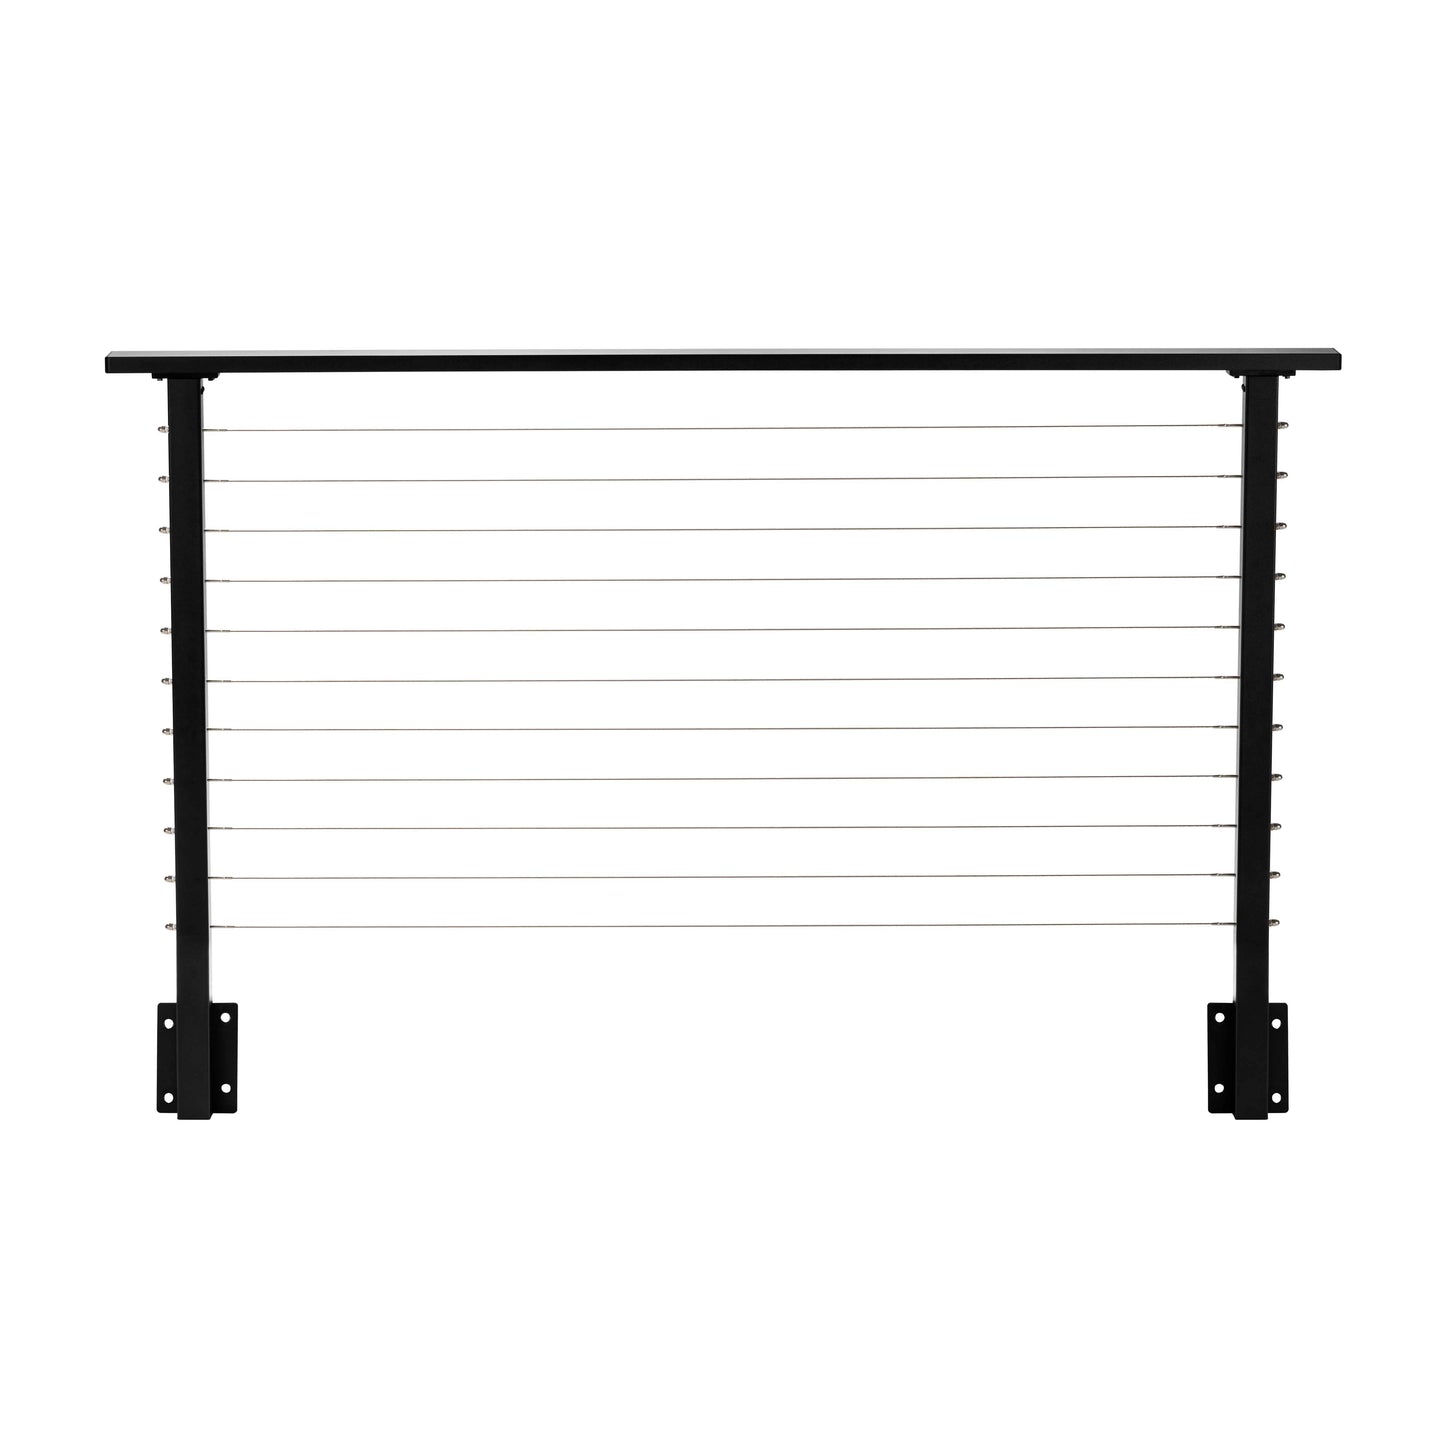 4 ft. Black Deck Cable Railing 36 in. Face Mount